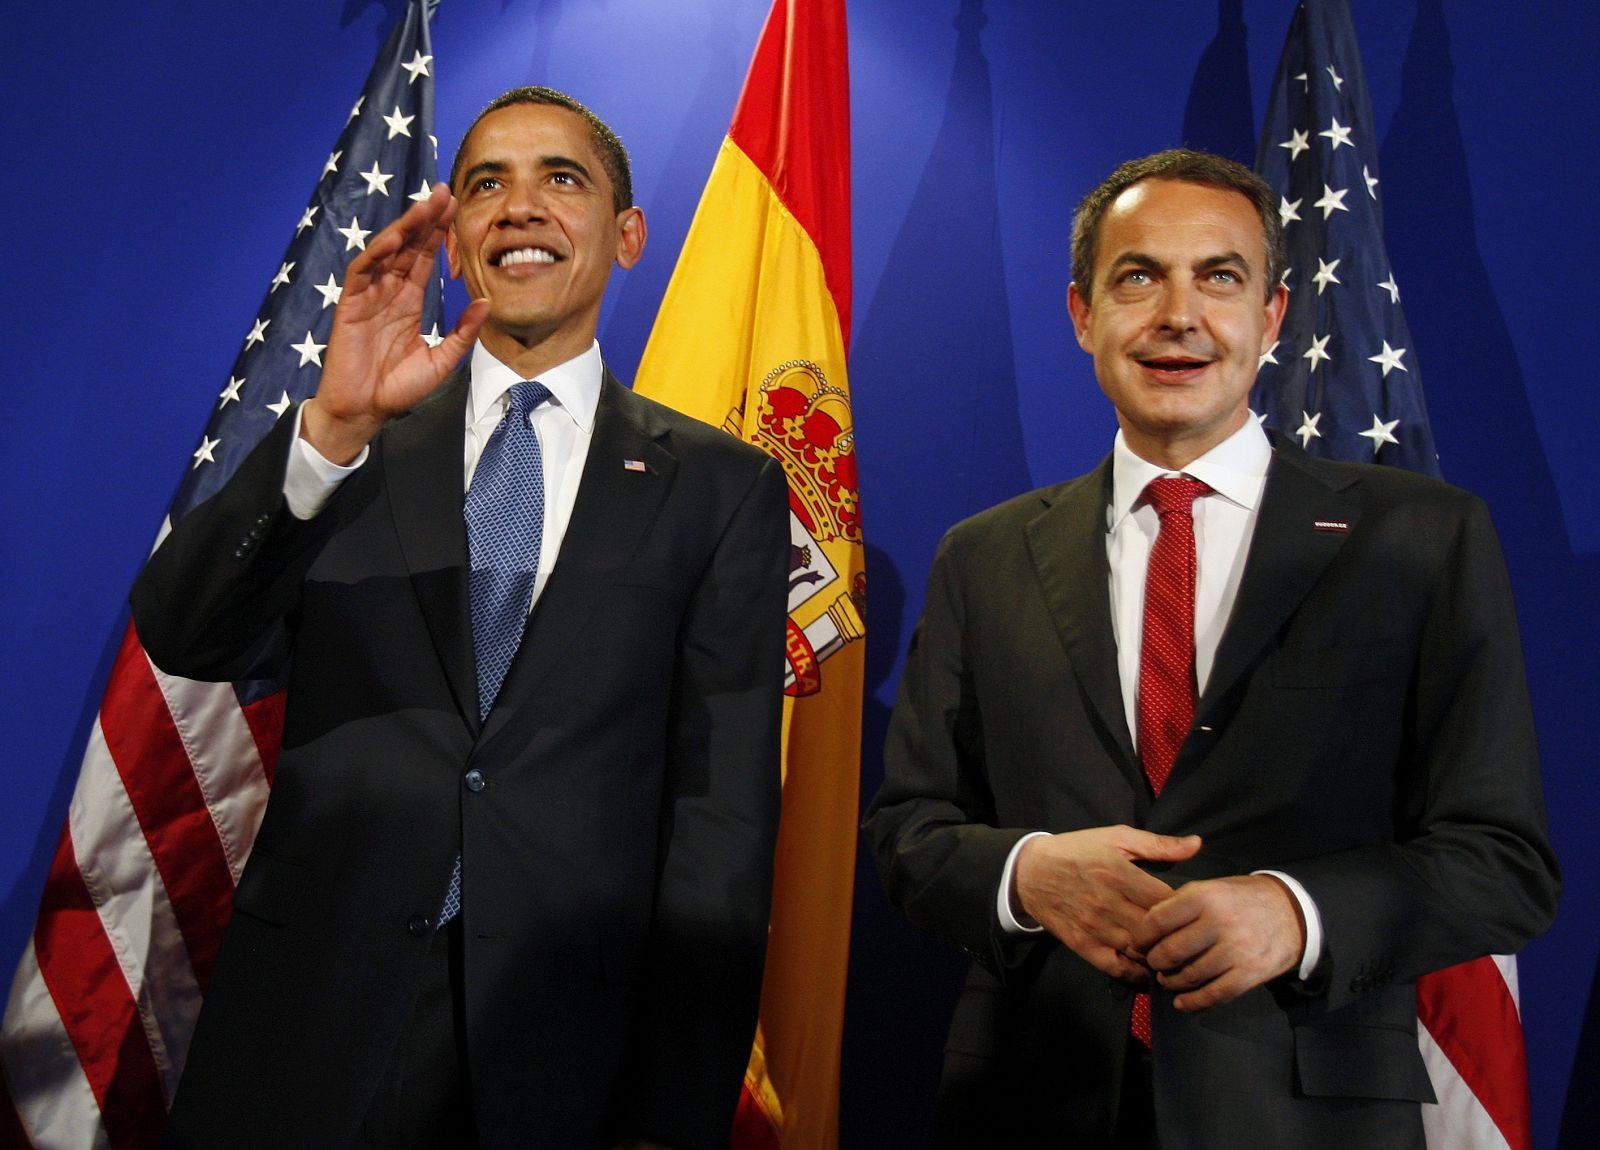 U.S. President Obama meets with Spain's PM Zapatero at the E.U. Summit in Prague